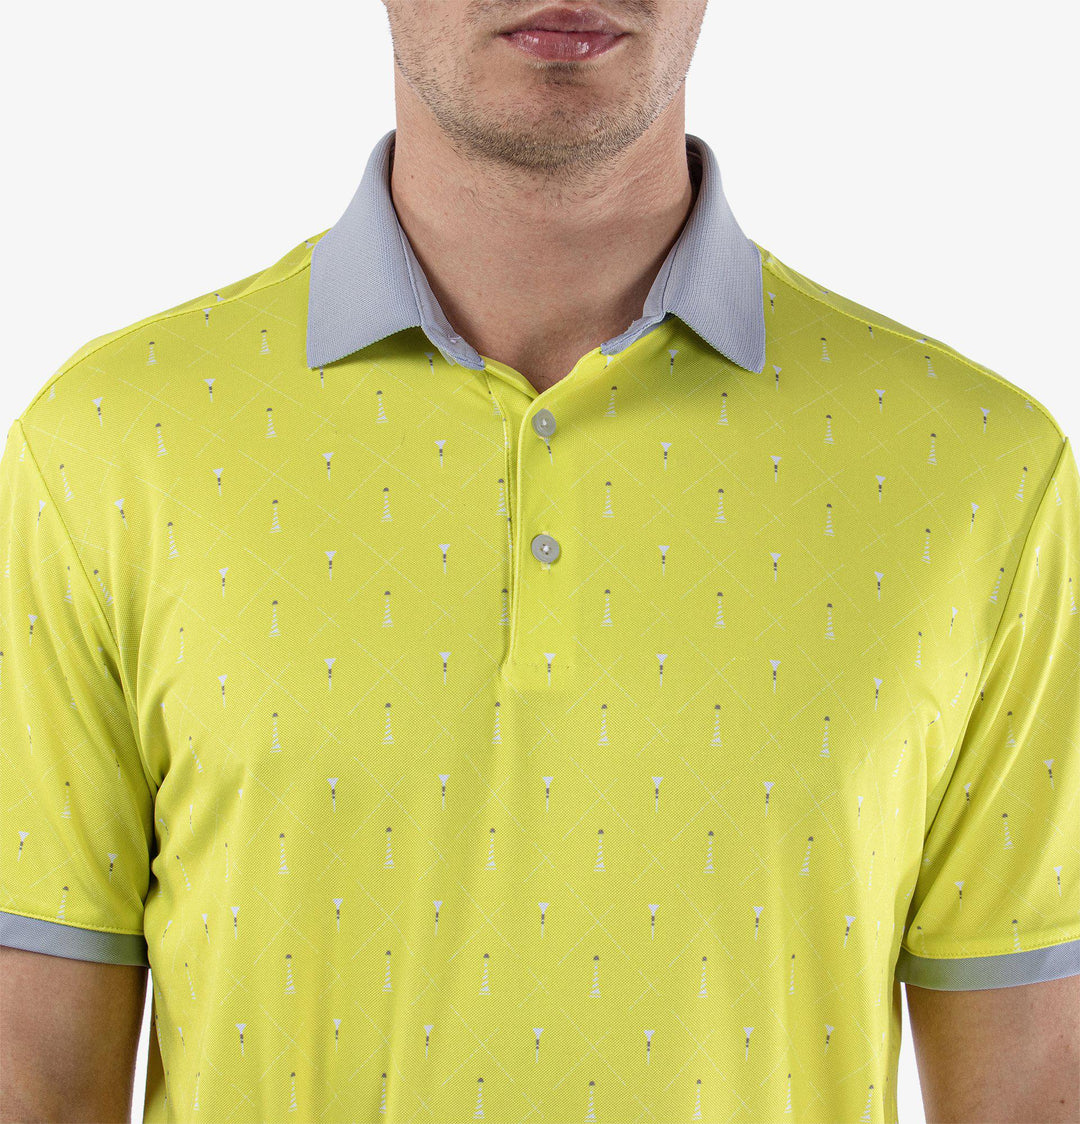 Manolo is a Breathable short sleeve golf shirt for Men in the color Sunny Lime/Cool Grey/White(4)